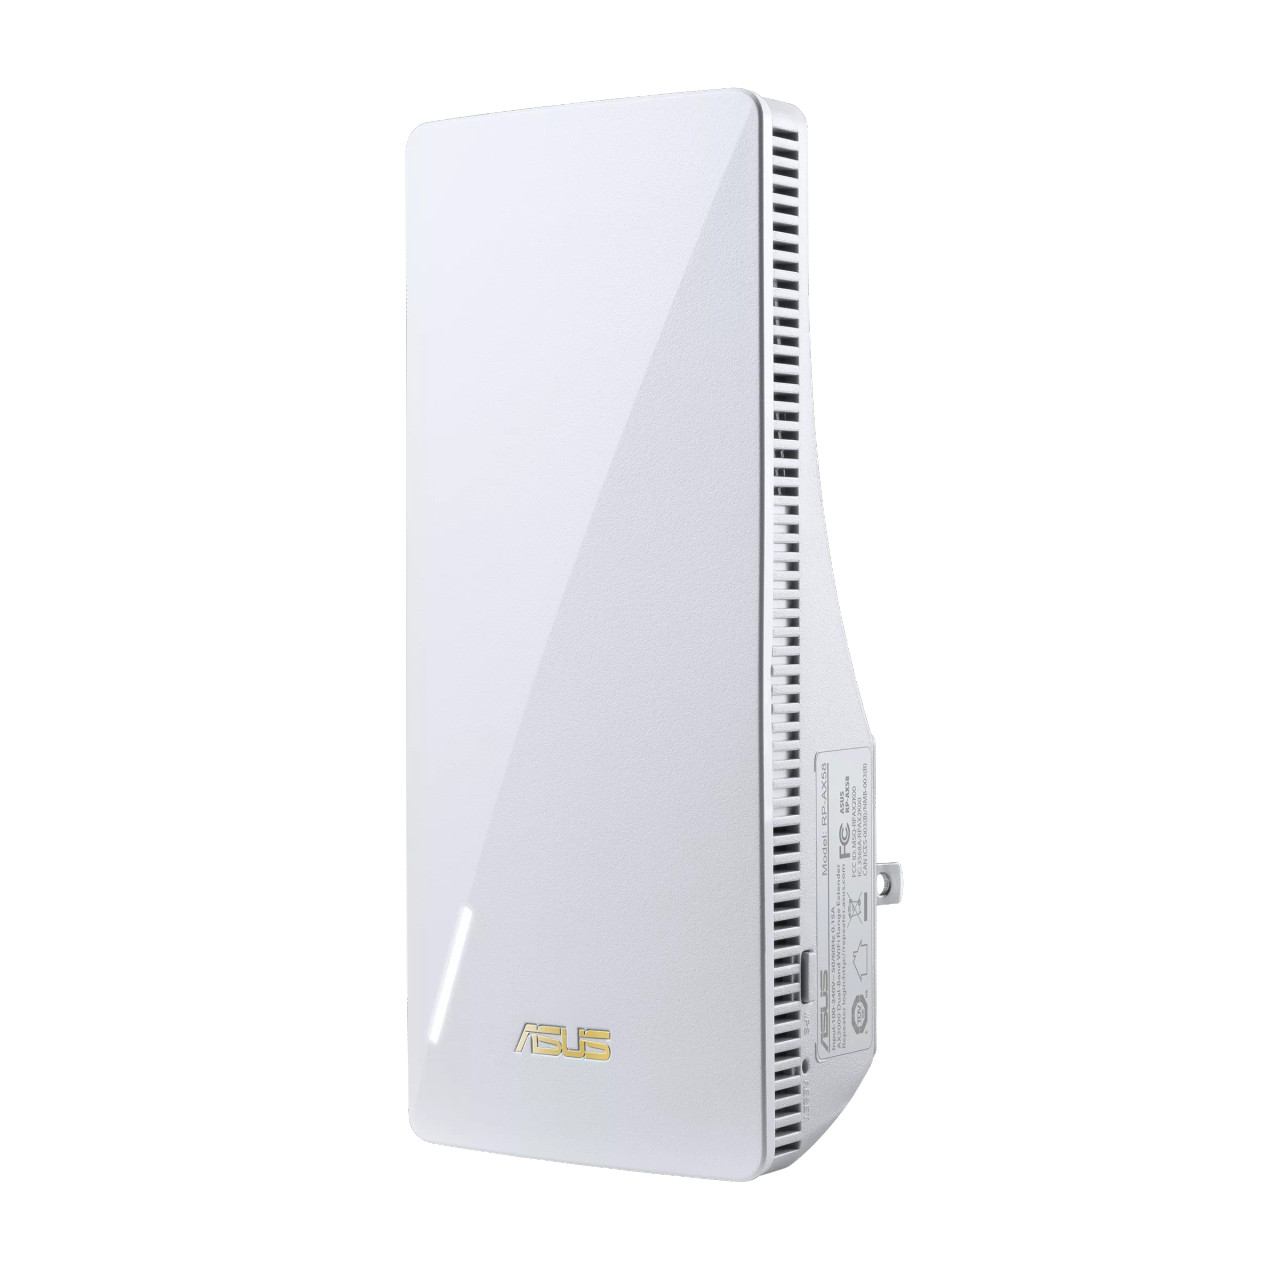 Asus AX3000 Dual-band WiFi 6 (802.11ax) Range Extender/ AiMesh Extender for  seamless mesh WiFi; works with nearly any WiFi router, 90IG07C0-MU0C10, AYOUB COMPUTERS